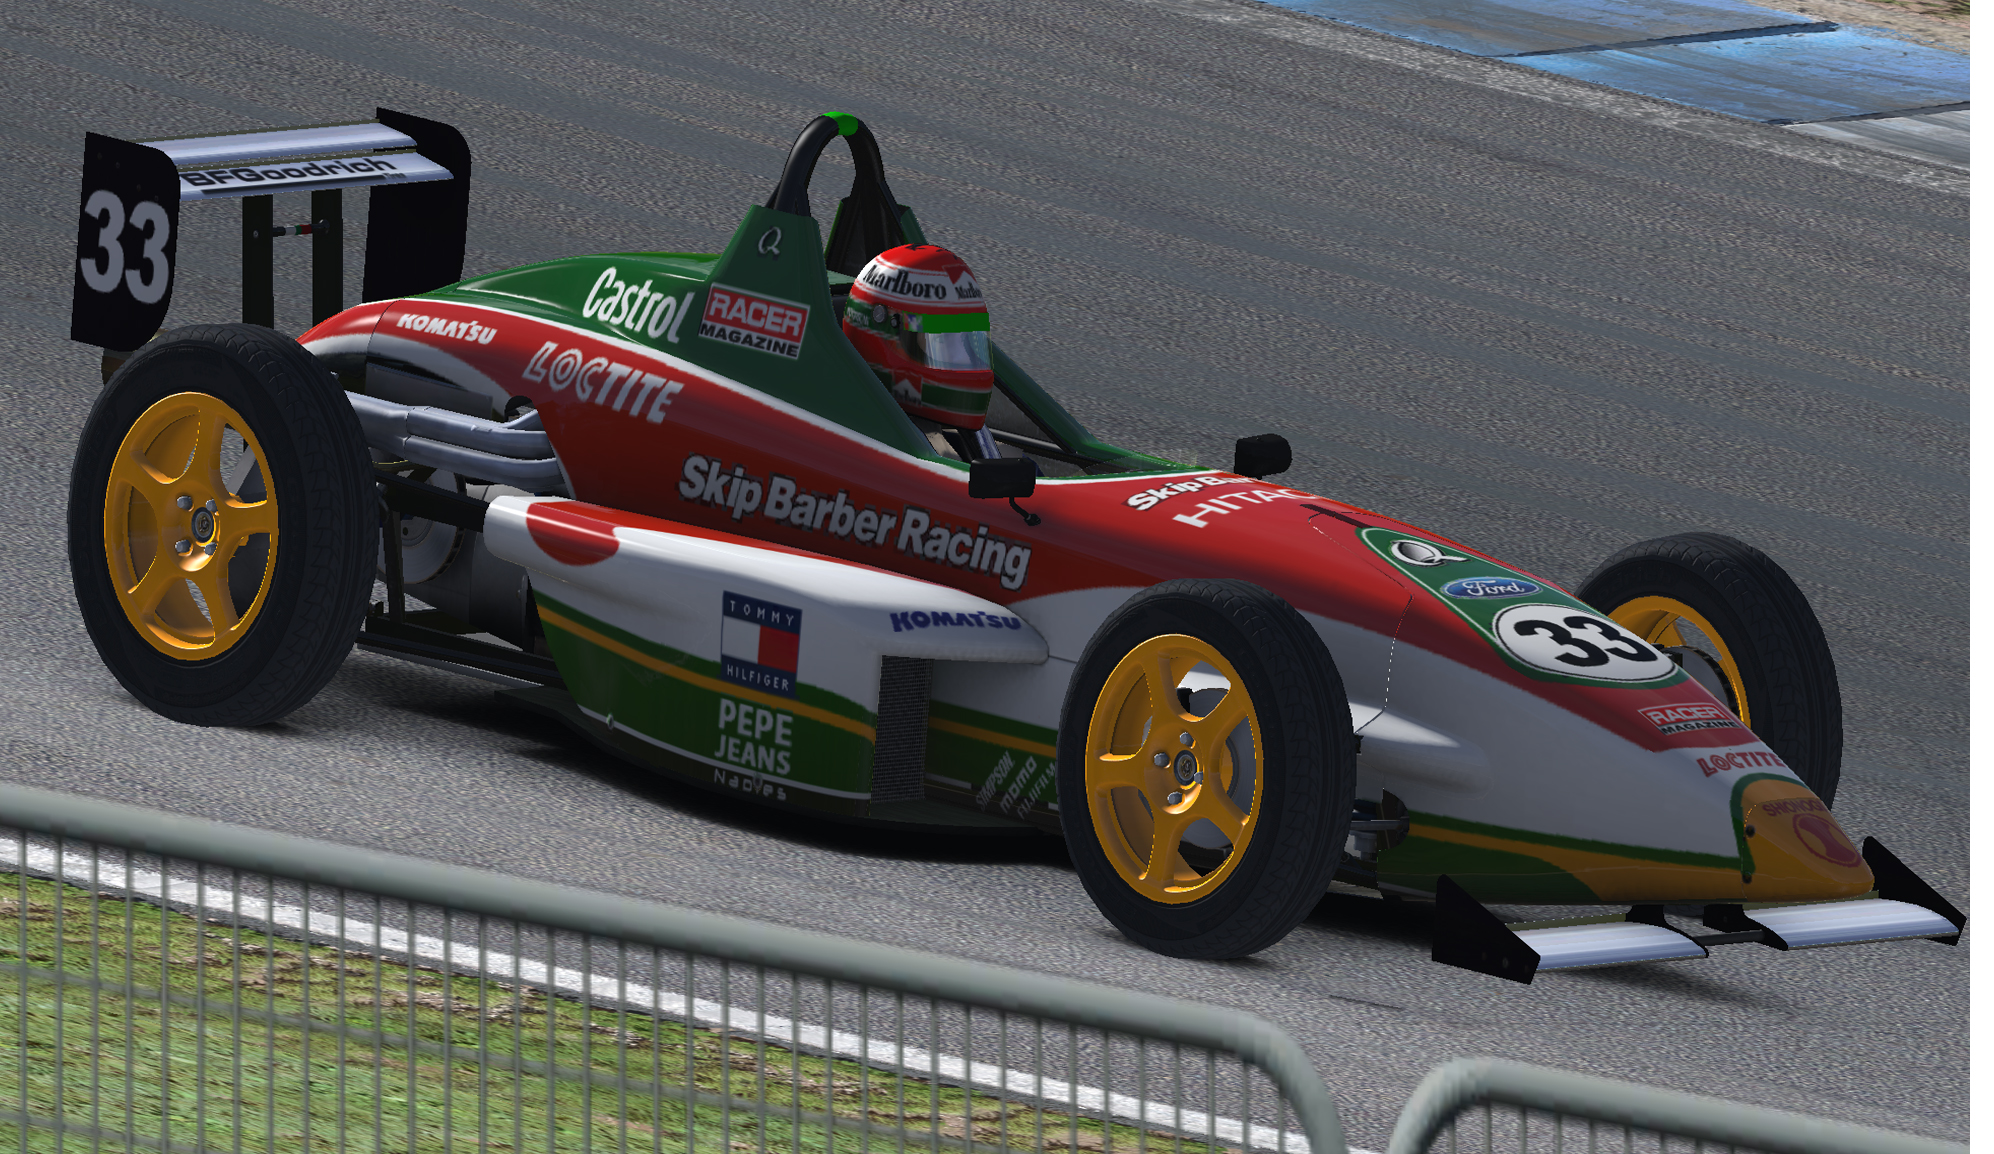 lotus 107b (1993) reloaded by Paolo Zironi - Trading Paints